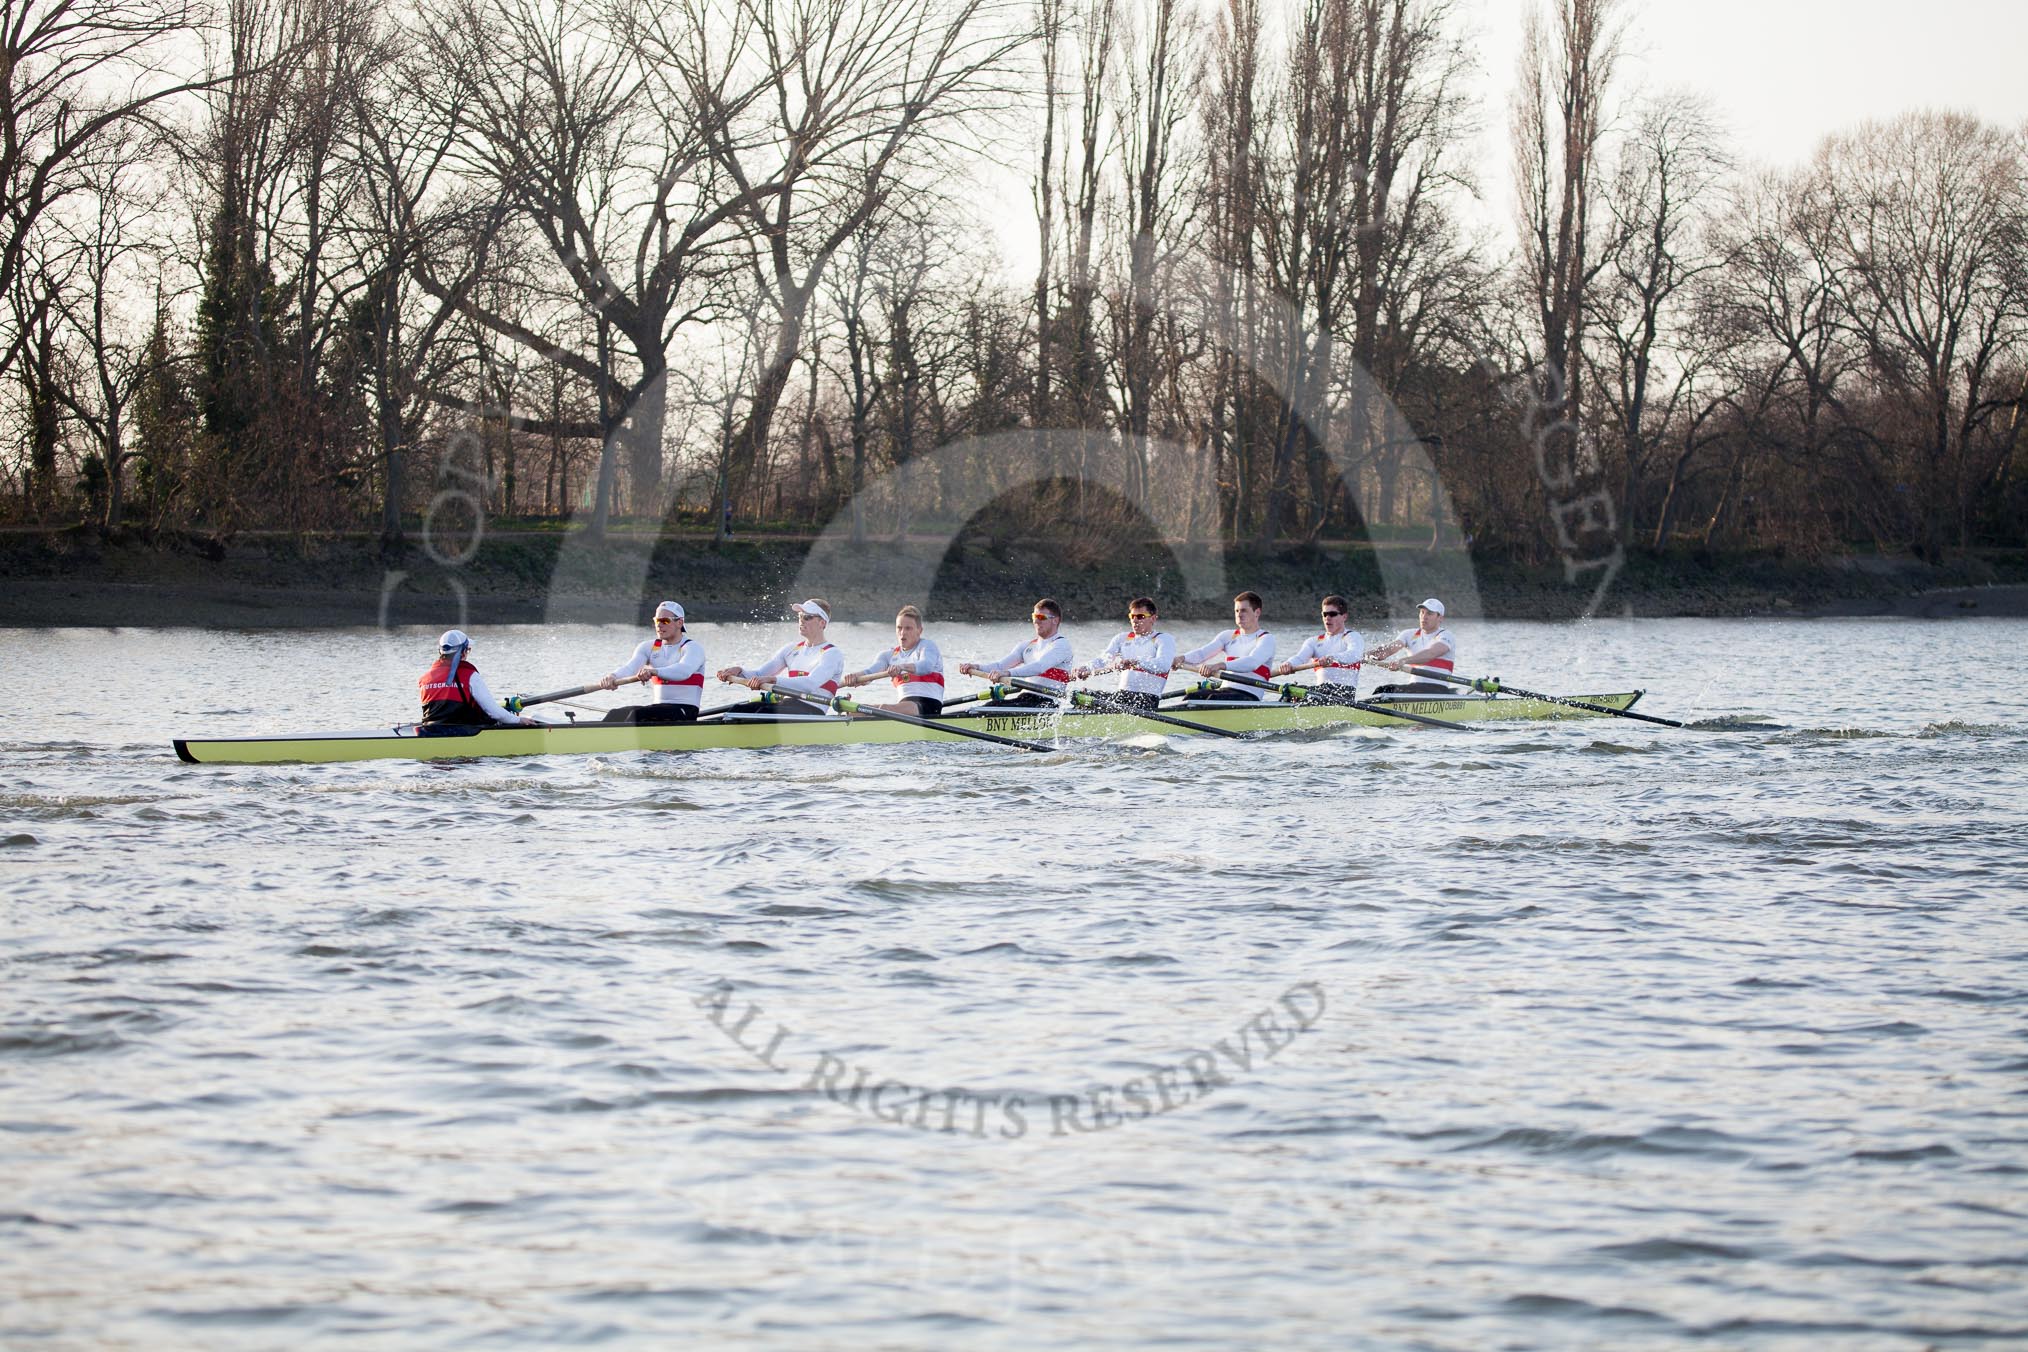 The Boat Race season 2014 - fixture OUBC vs German U23: The German U23-boat approaching the Mile Post..
River Thames between Putney Bridge and Chiswick Bridge,



on 08 March 2014 at 16:48, image #88